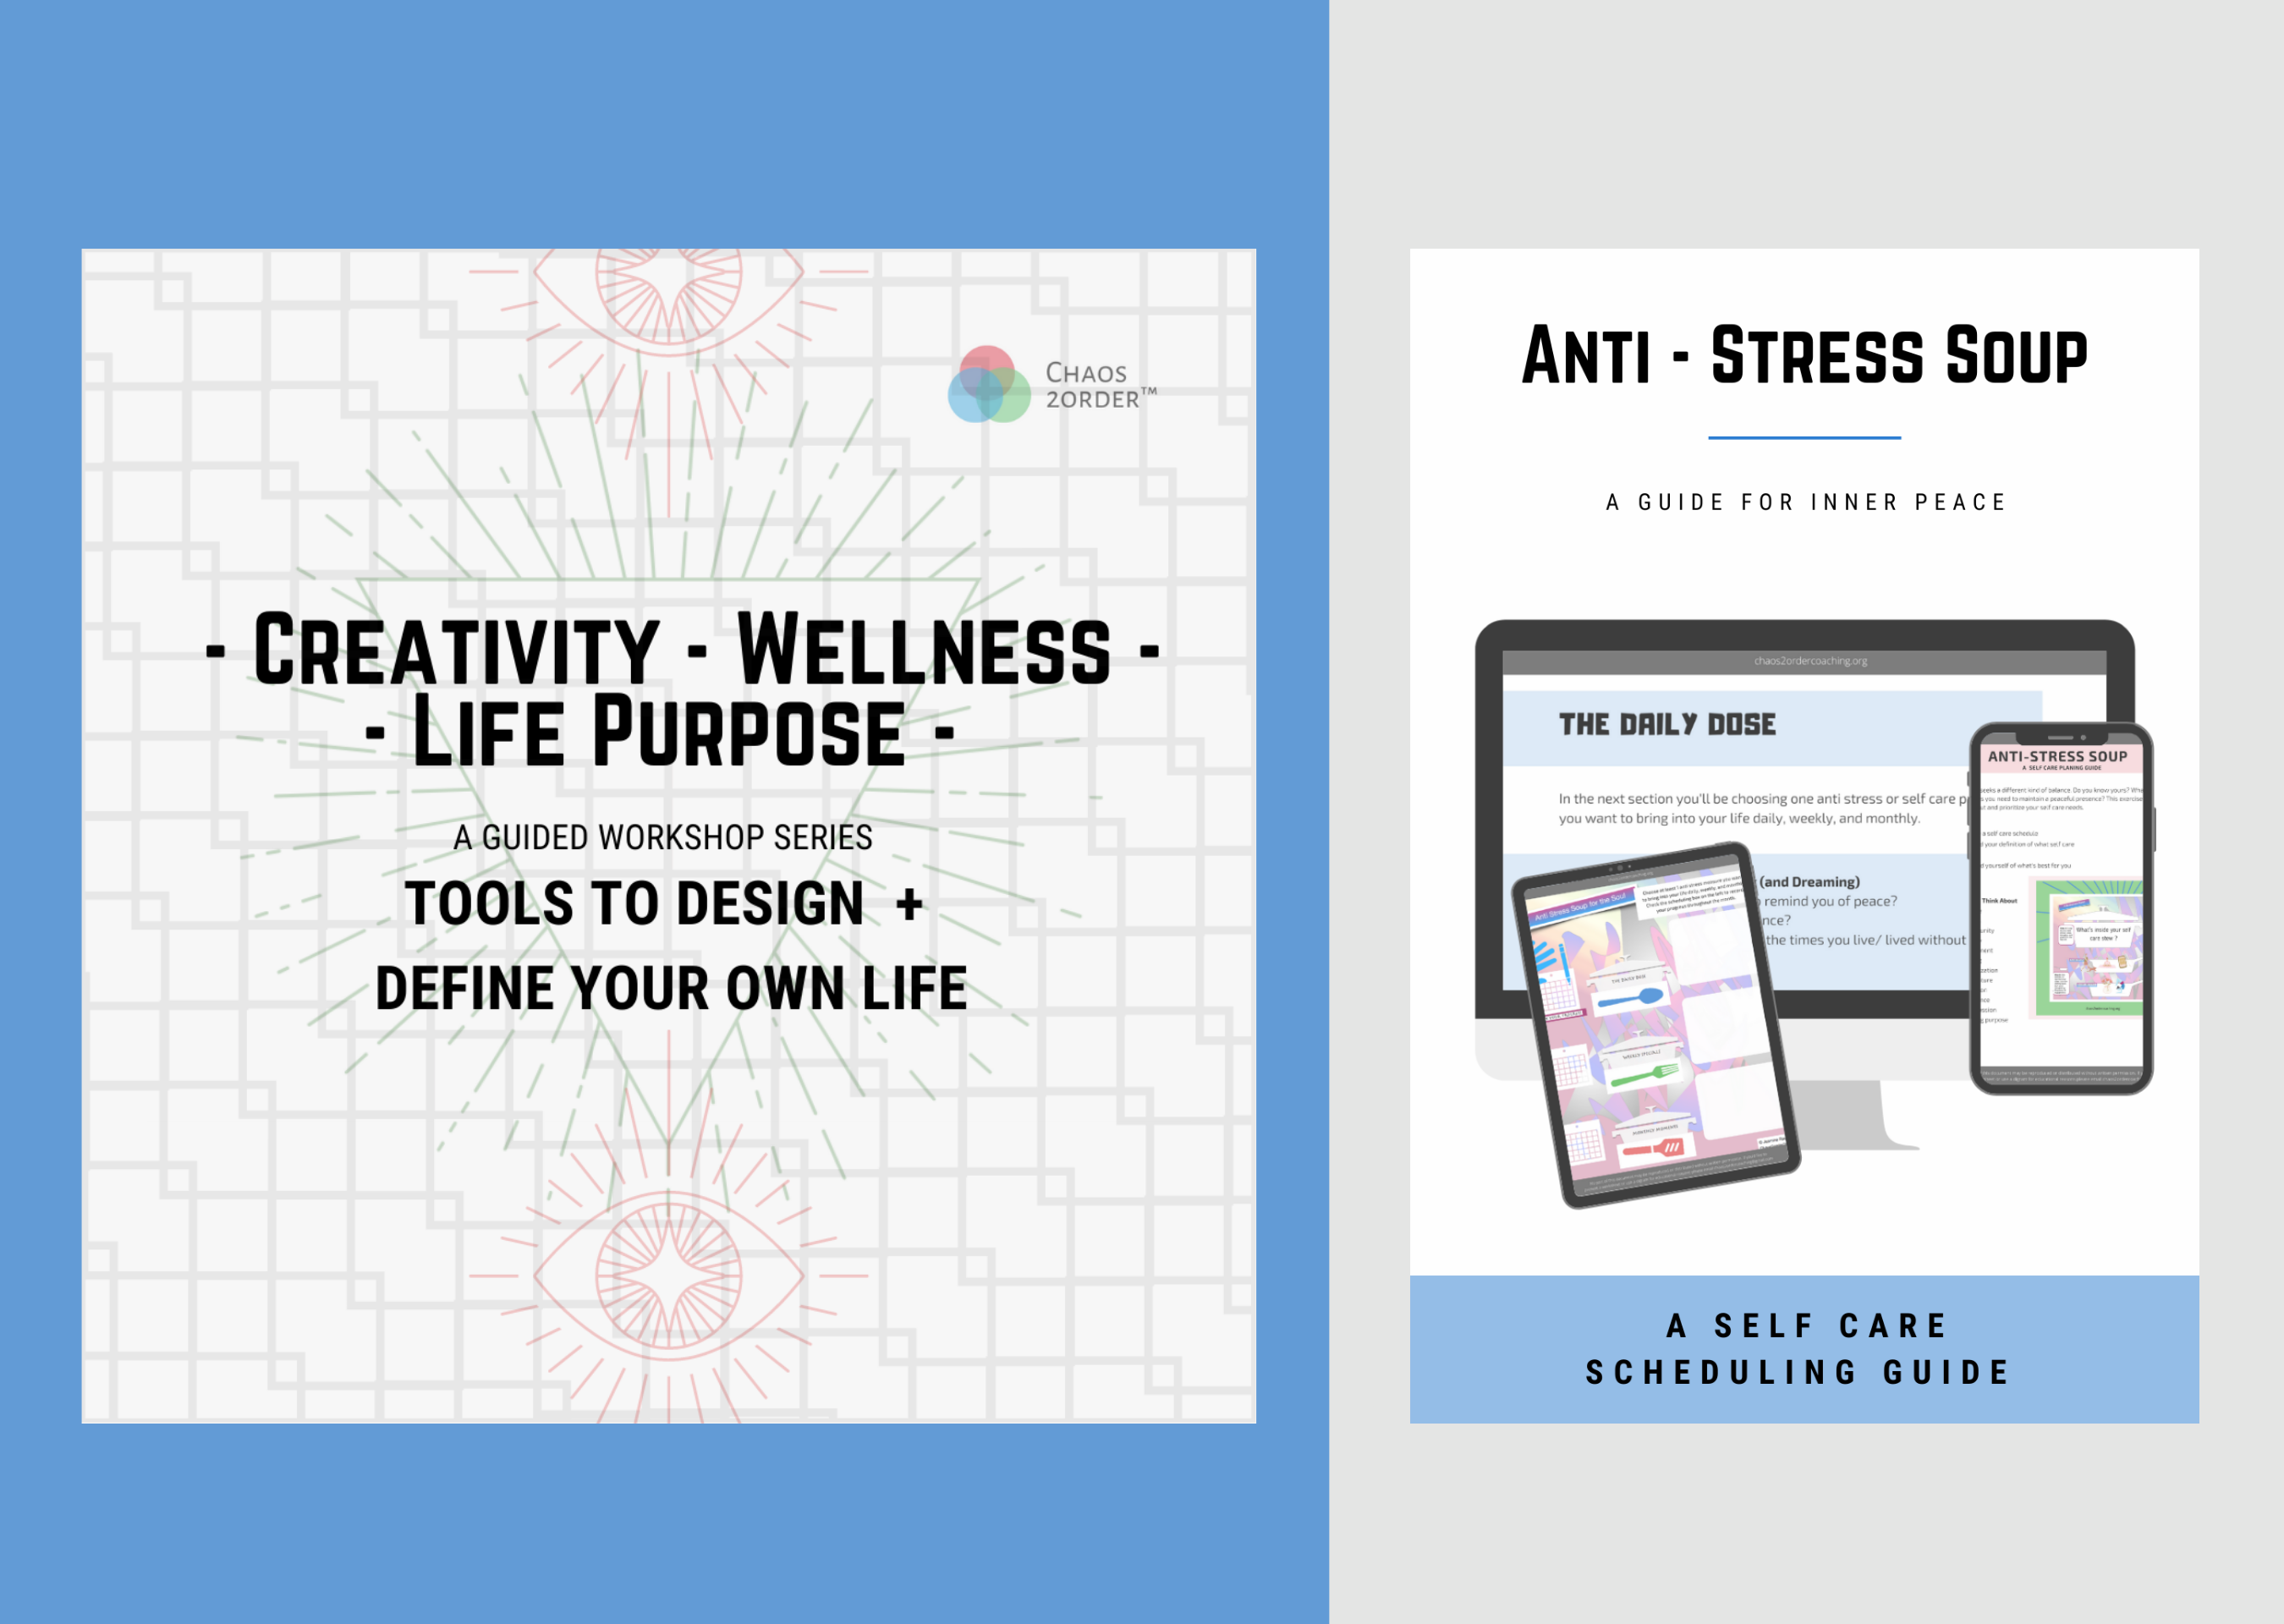 Creativity - Wellness - Life Purpose - Guided Workshop Series, Anti Stress Soup, A Self Care Scheduling Guide